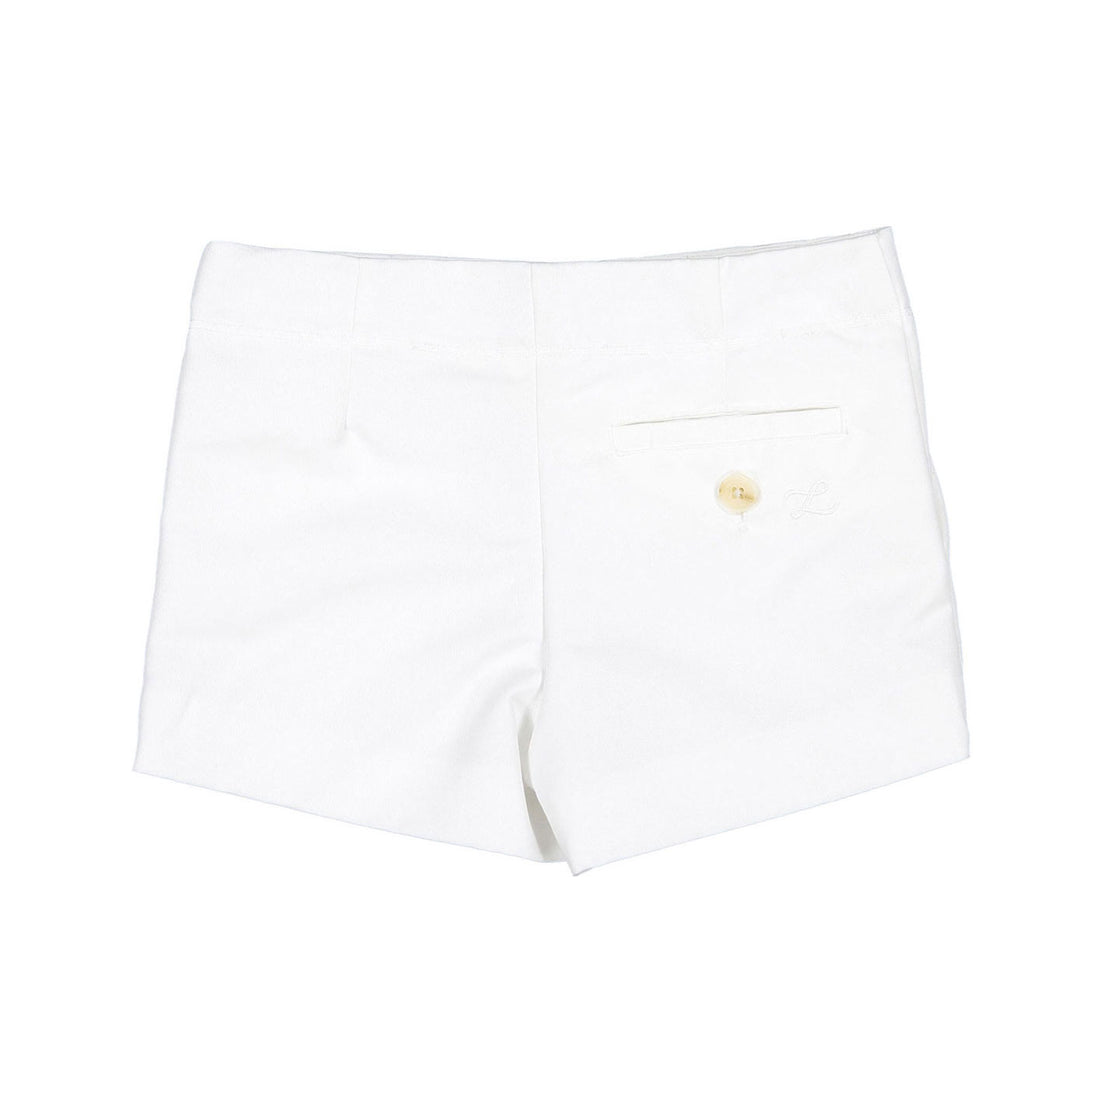 L by Ladida White StructuredShorts